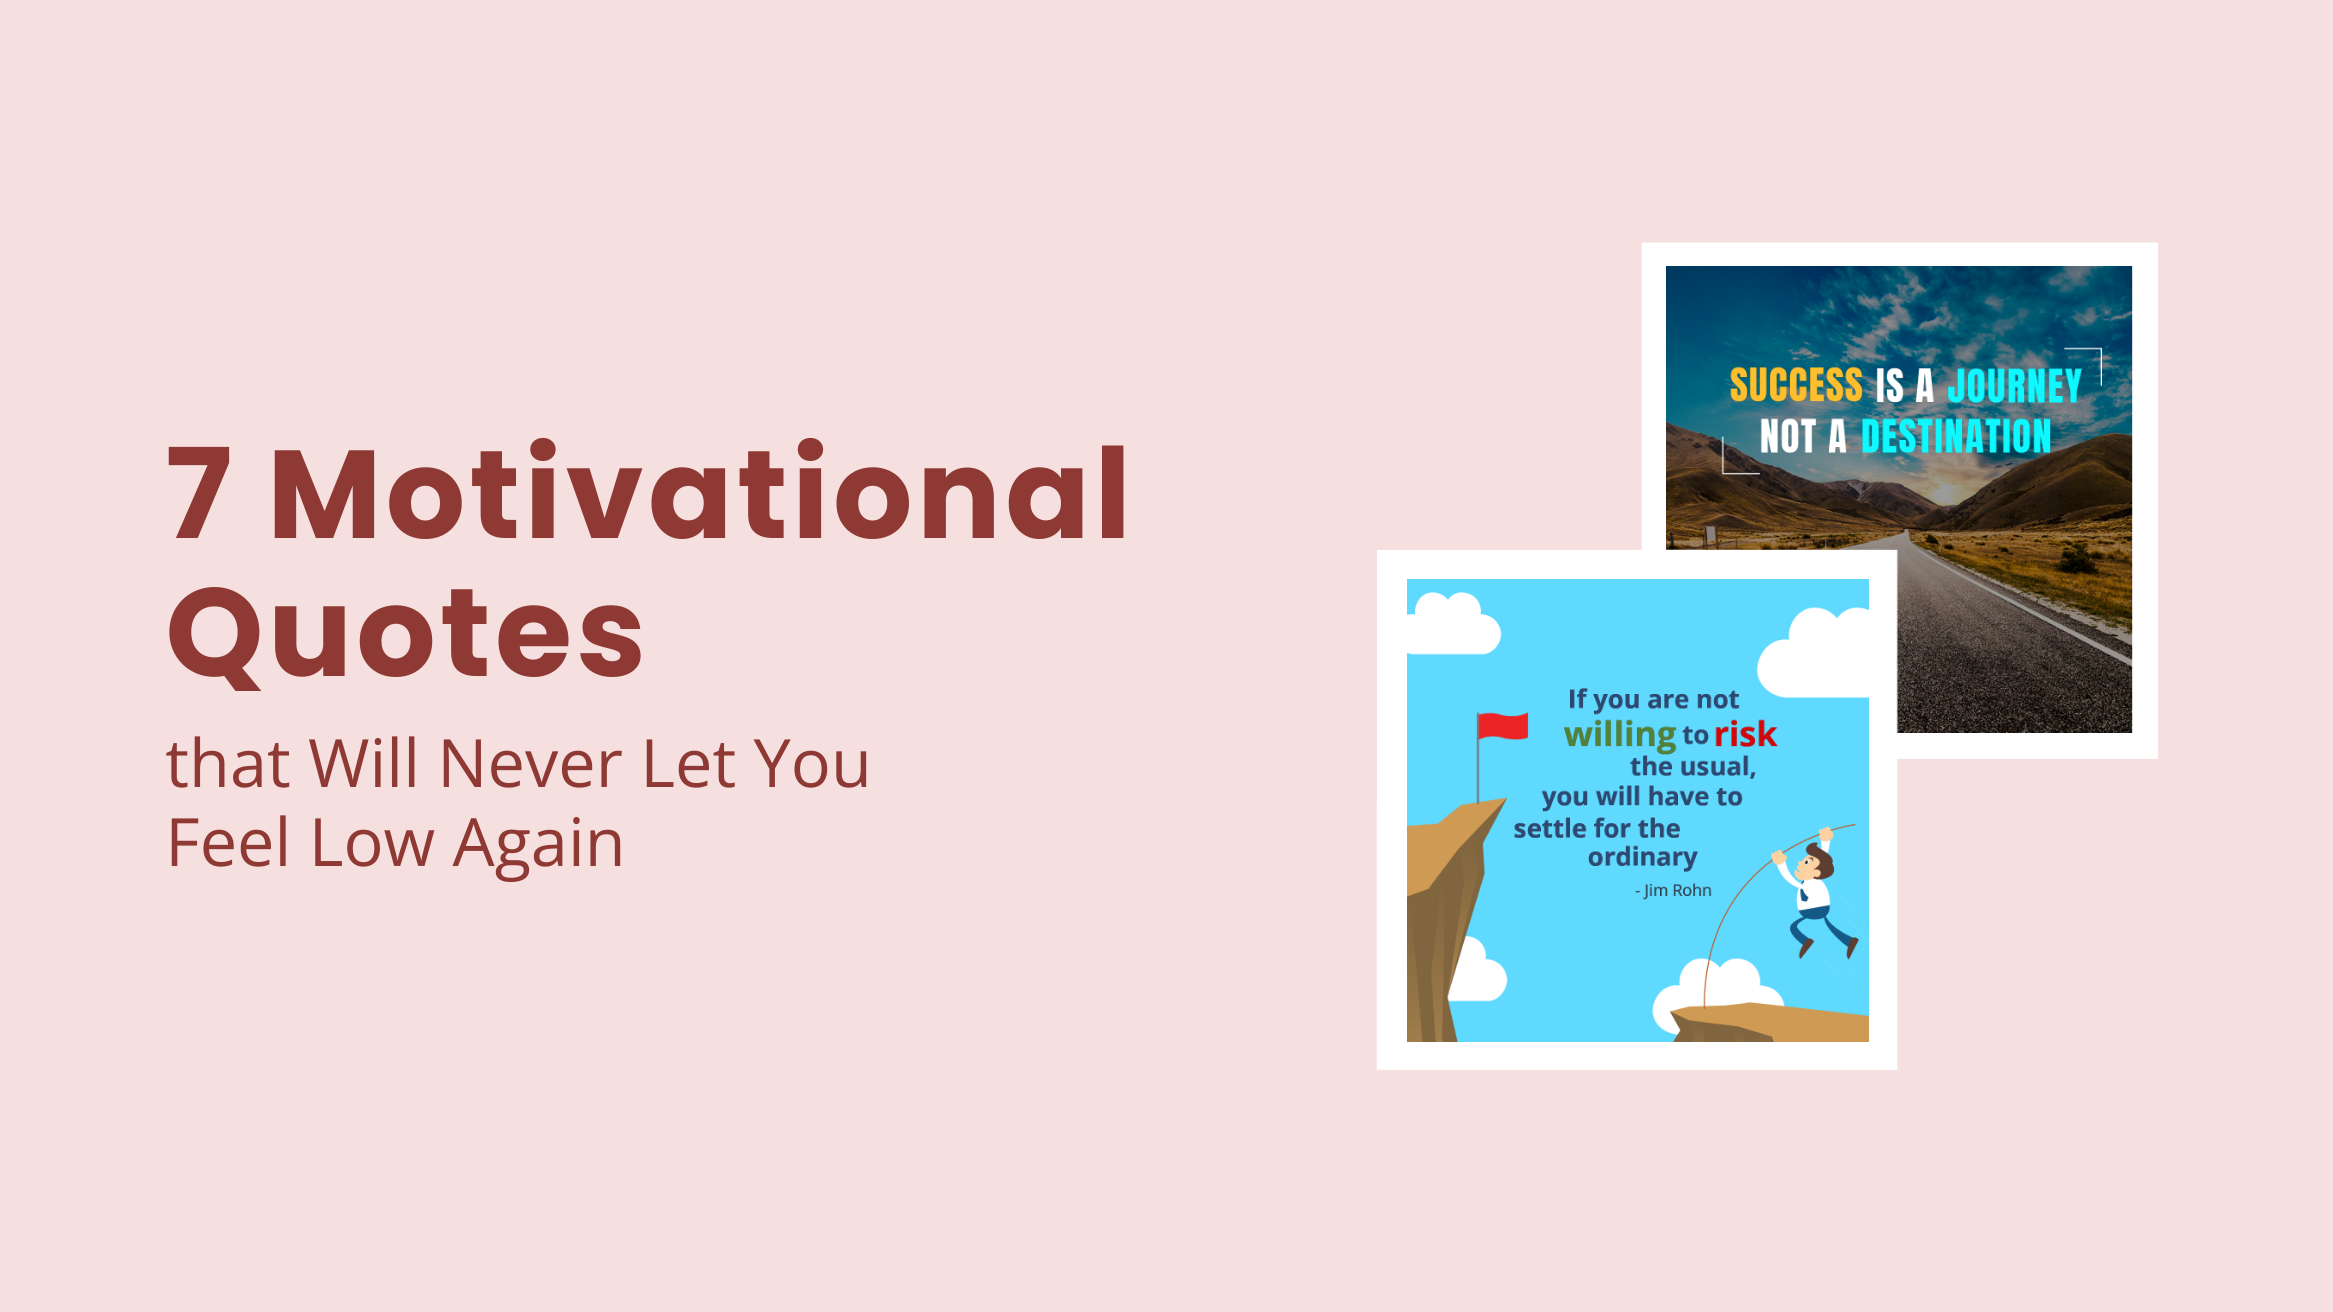 7 Motivational Quotes that Will Never Let You Feel Low Again